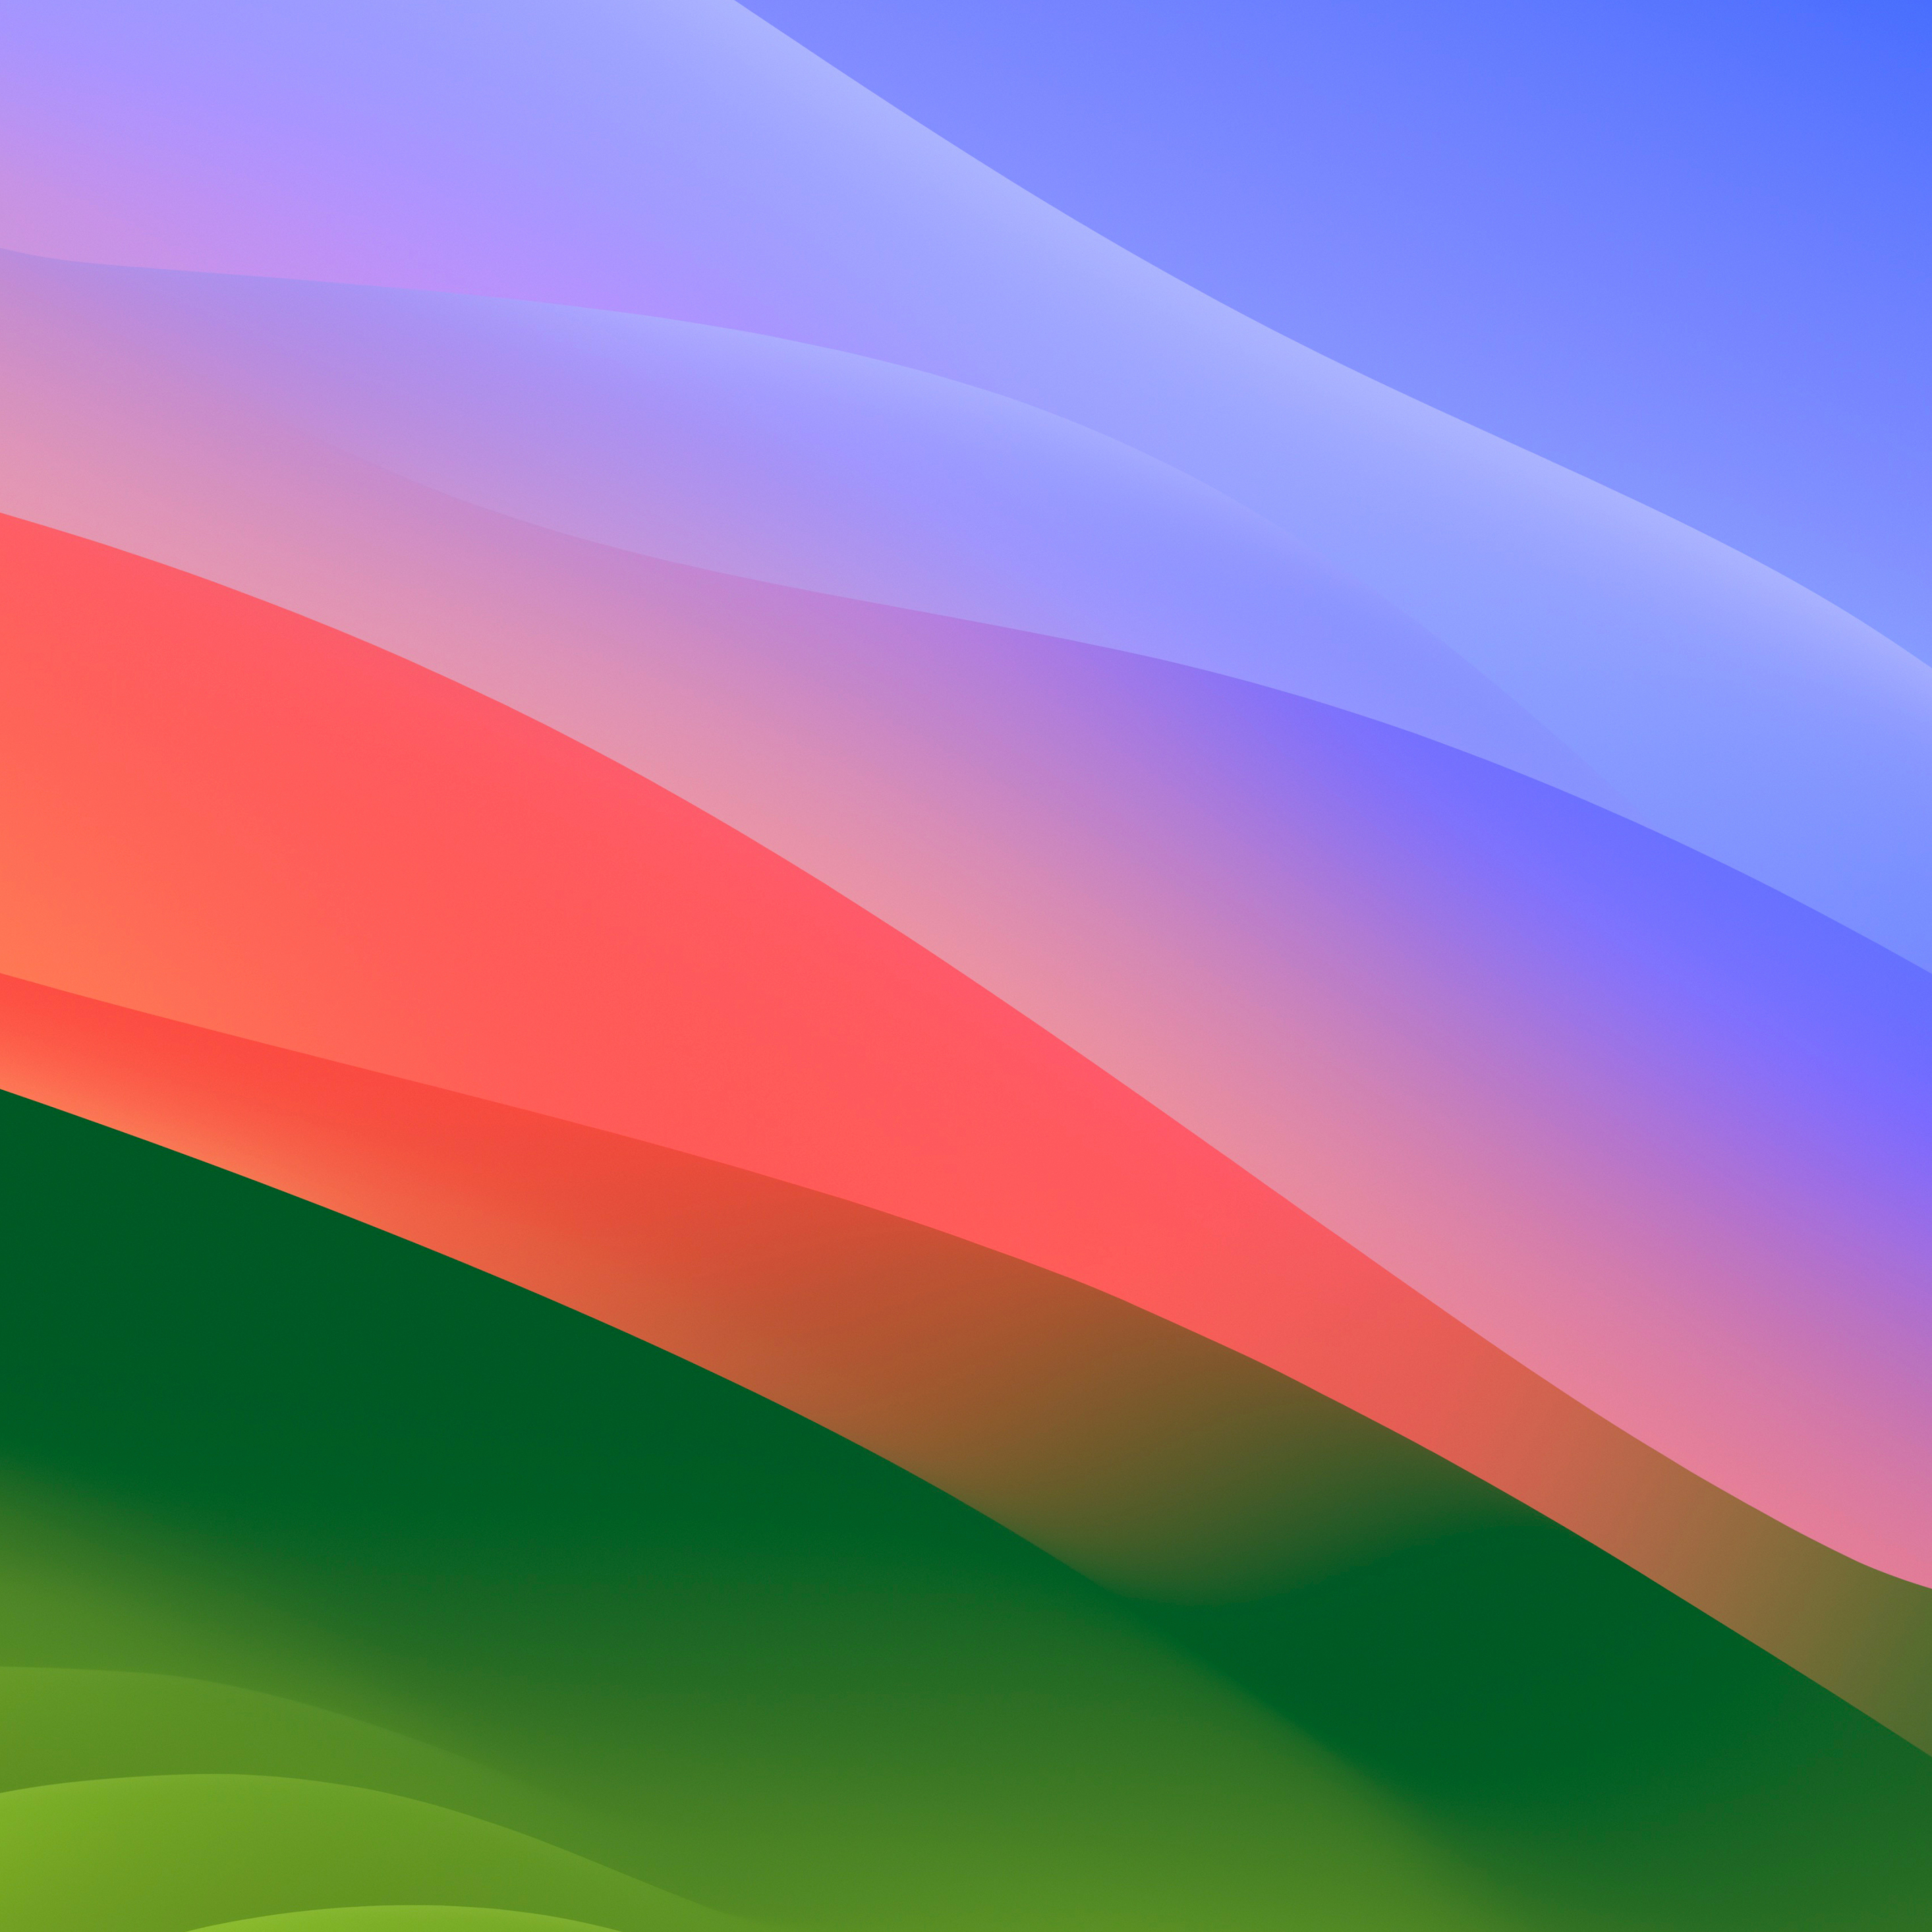 MacOS Sonoma, colorful waves, stock photo, 2932x2932 wallpaper